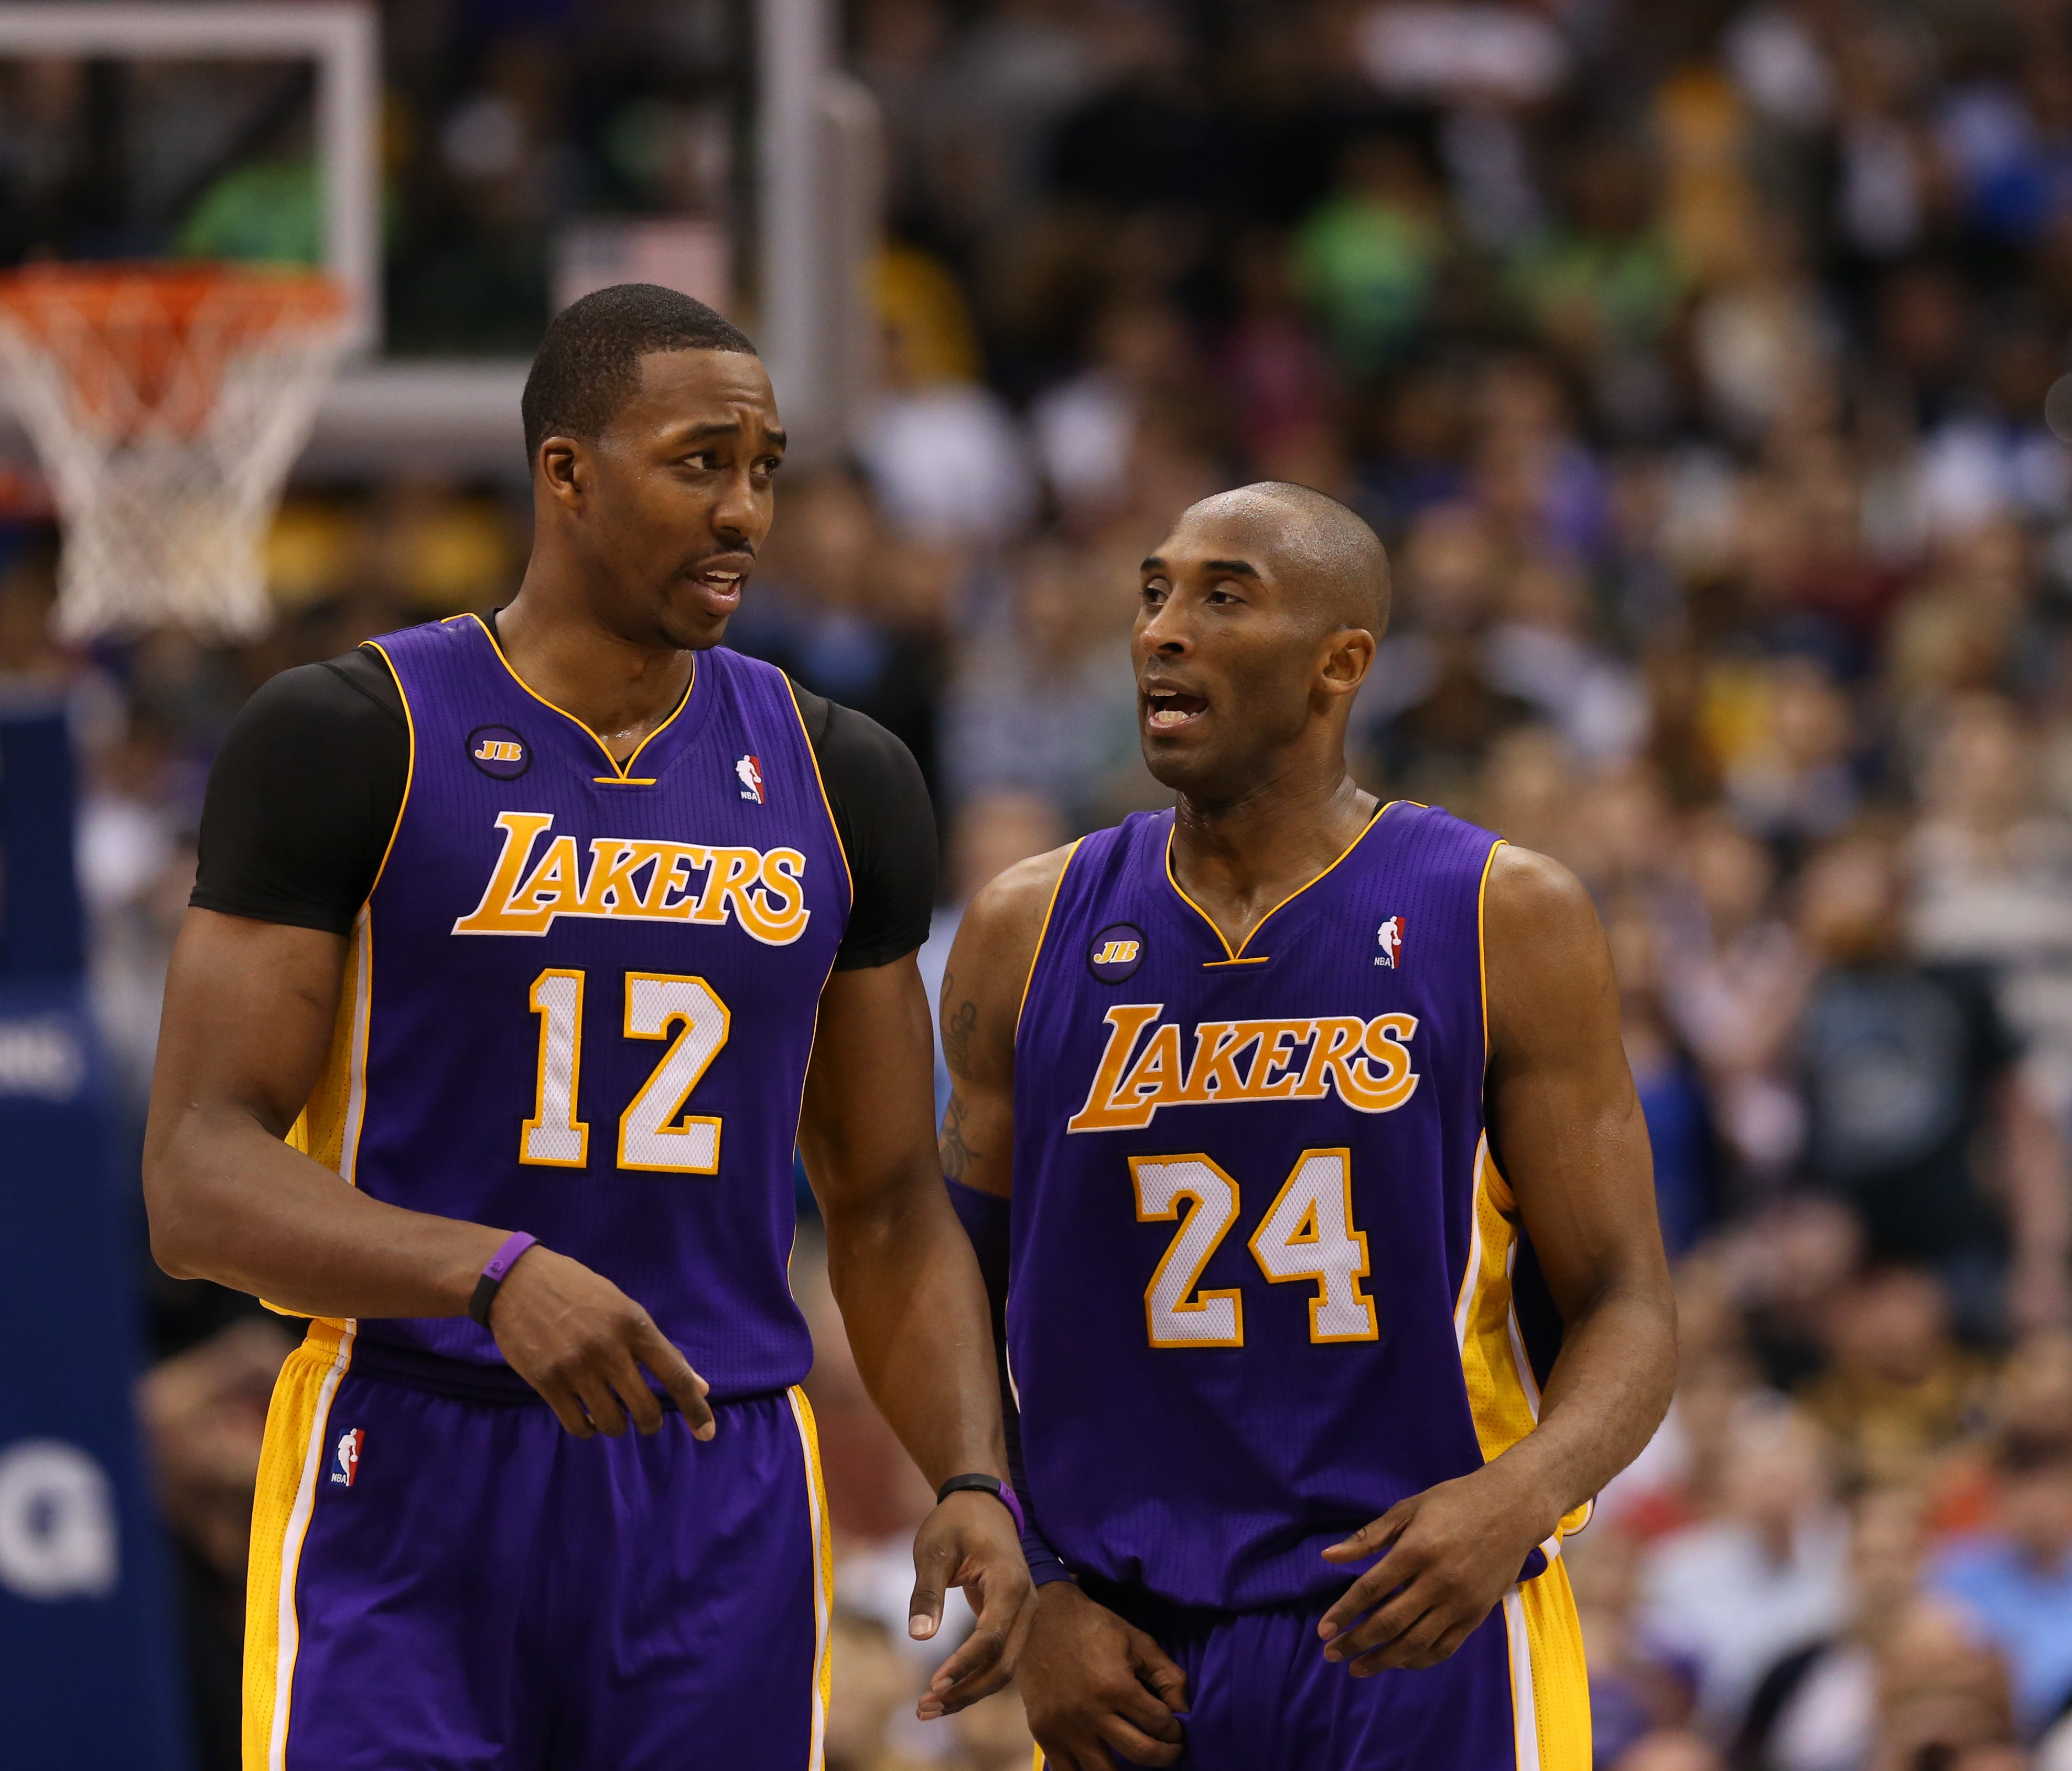 Los Angeles Lakers guard Kobe Bryant speaks with center Dwight Howard during a game against the Dallas Mavericks.